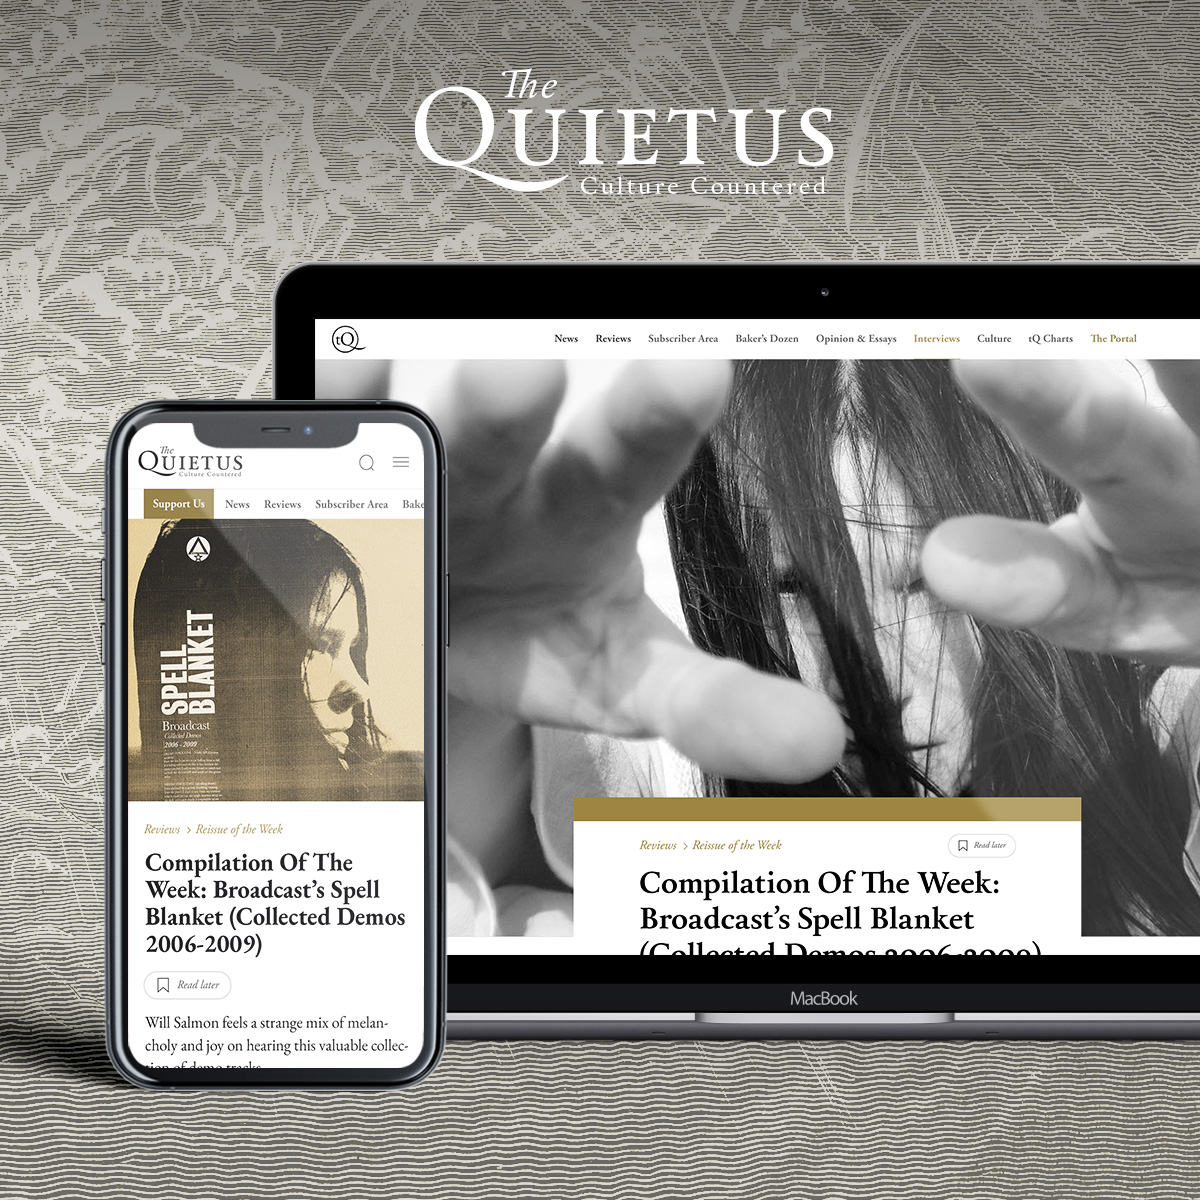 The Quietus has regenerated. Welcome to our new realm of cultural discovery, devilment and debate. thequietus.com #CultureCountered